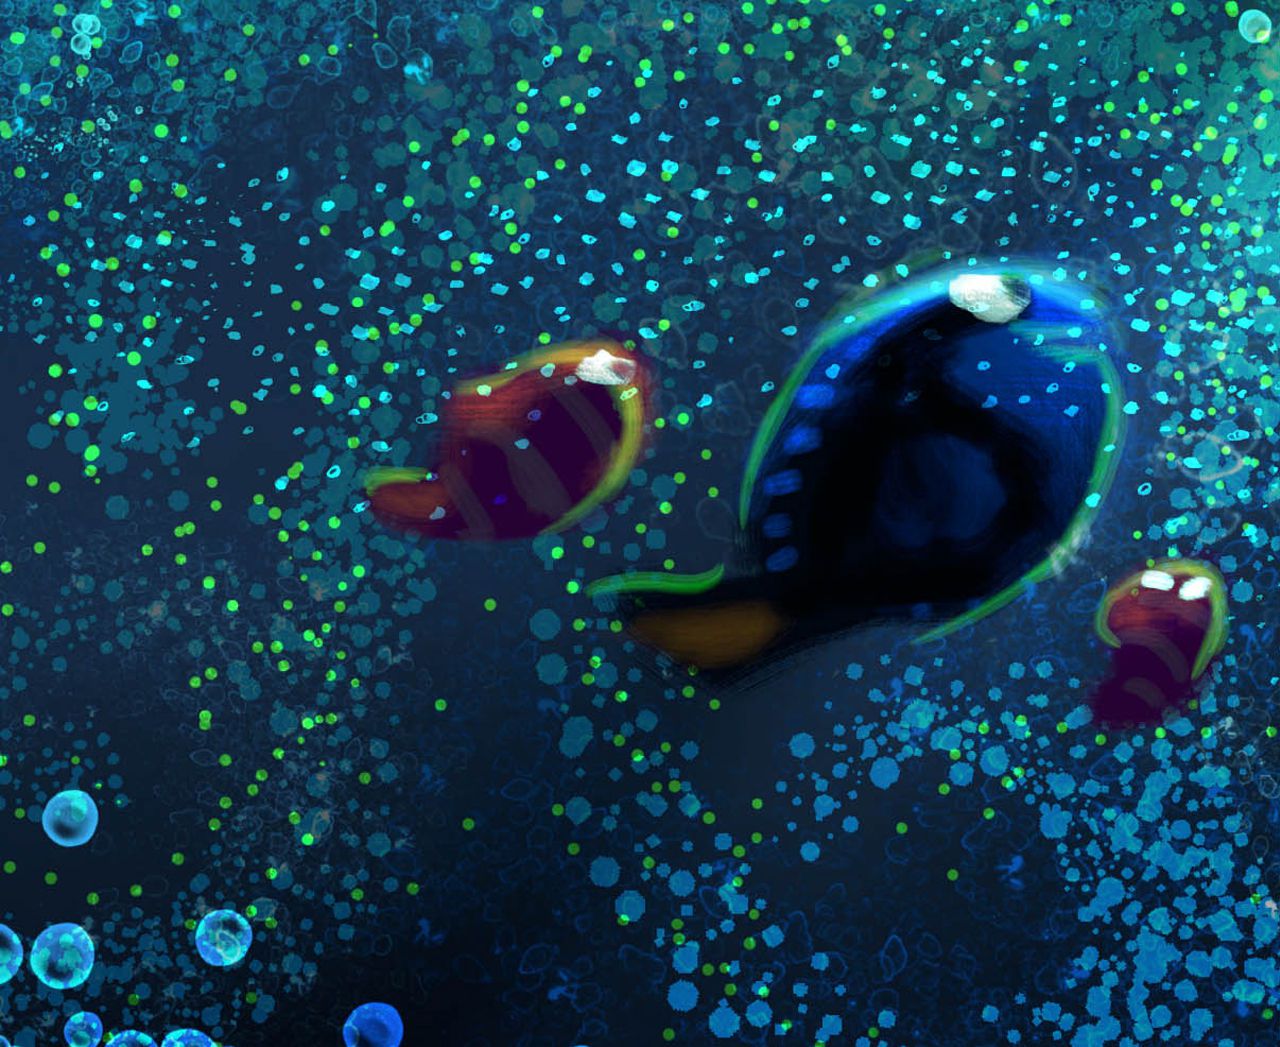 The Art of Finding Dory 3